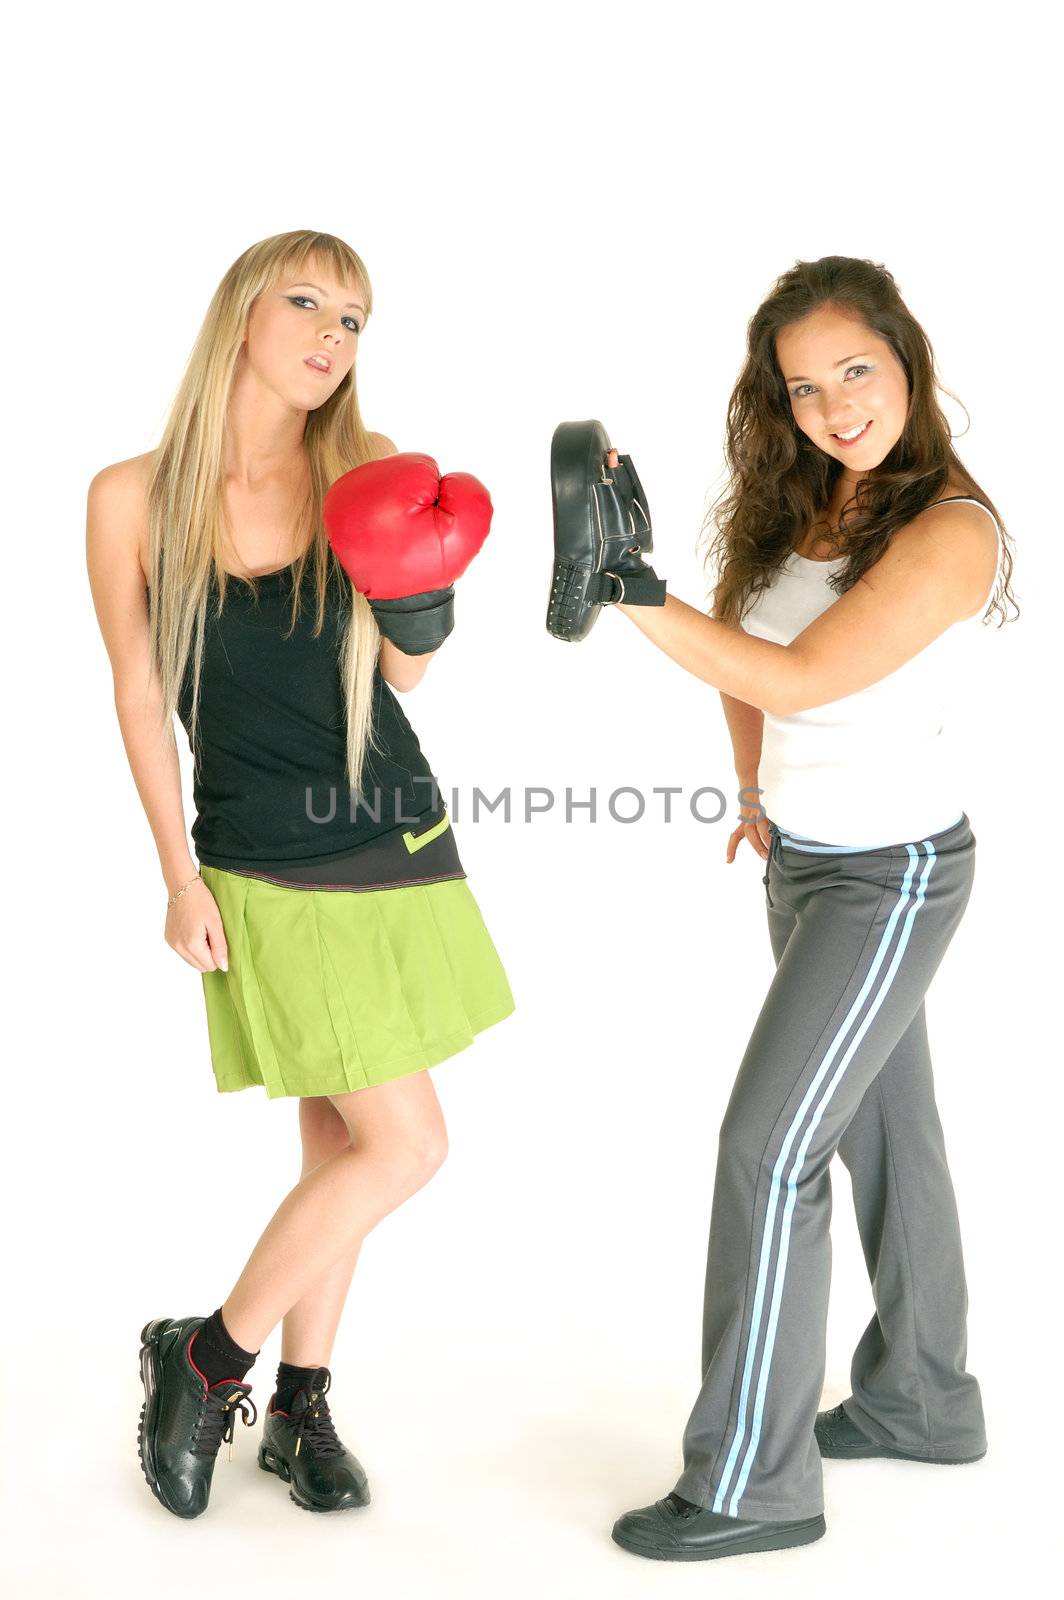 Two models on boxing.